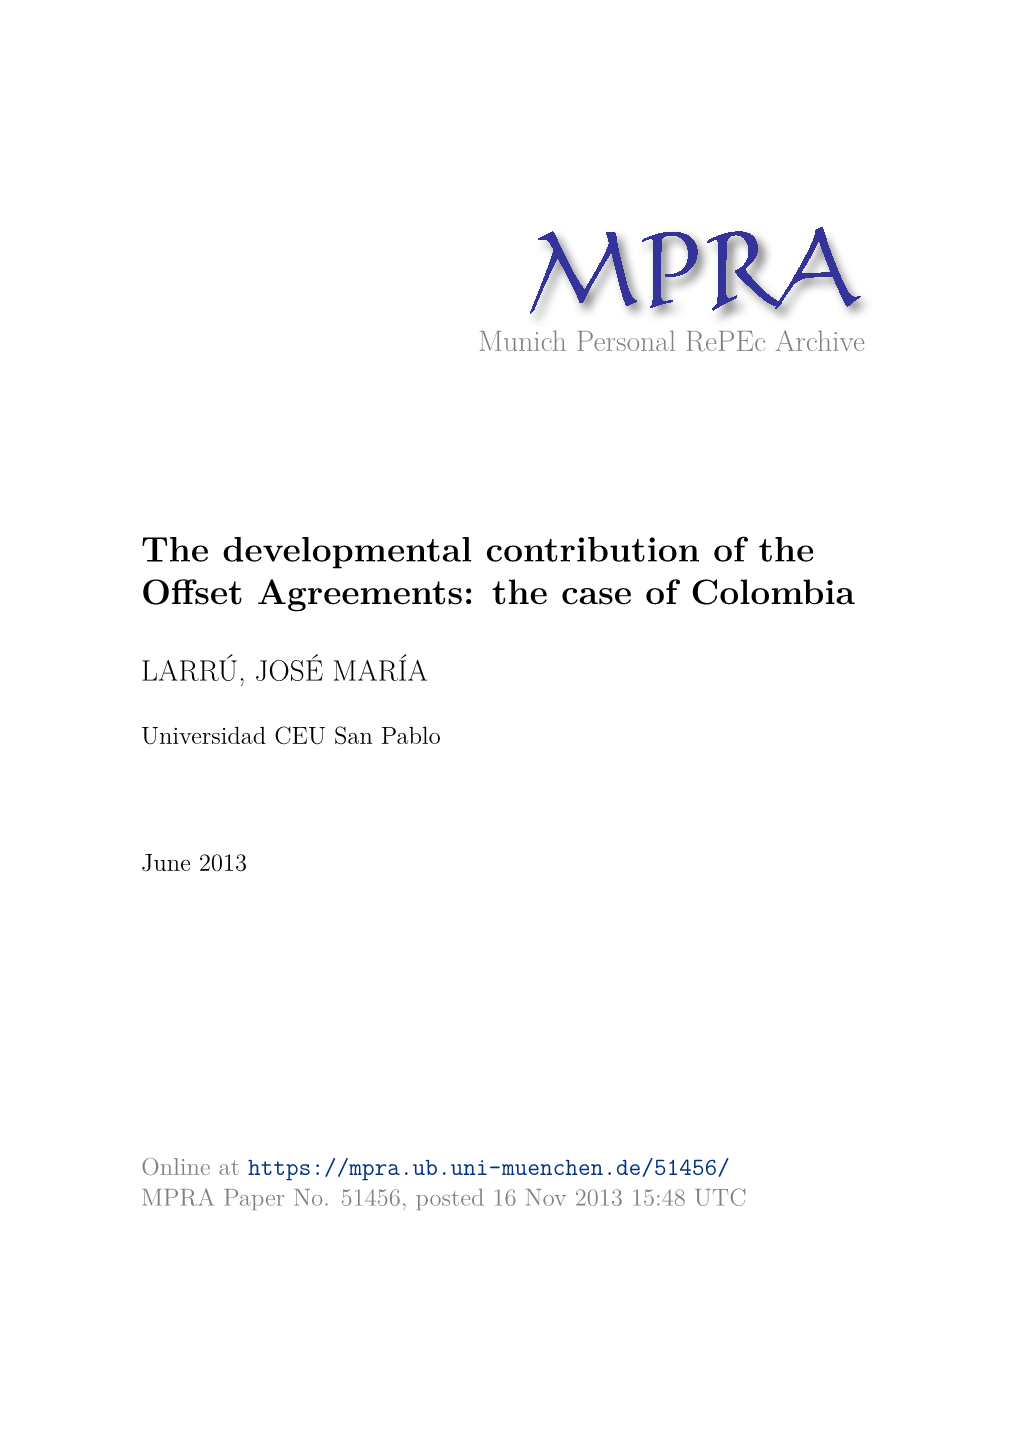 The Developmental Contribution of the Offset Agreements: the Case of Colombia1